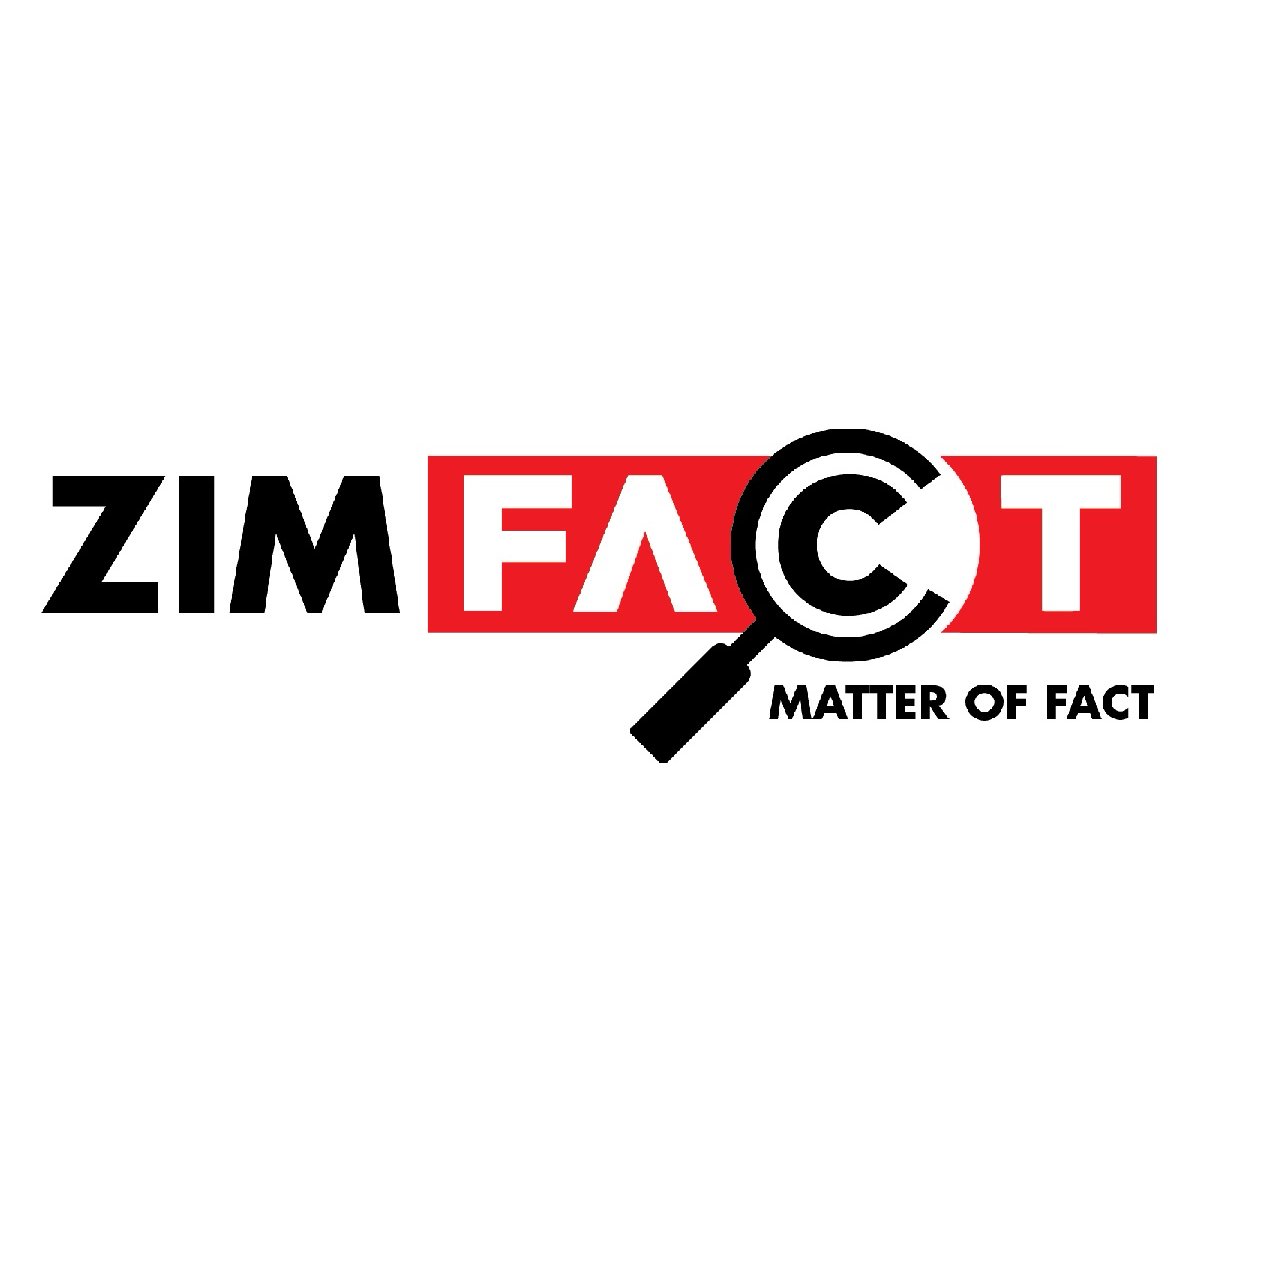 ZimFact is a Zimbabwean independent, non-partisan fact-checking and media literacy organisation